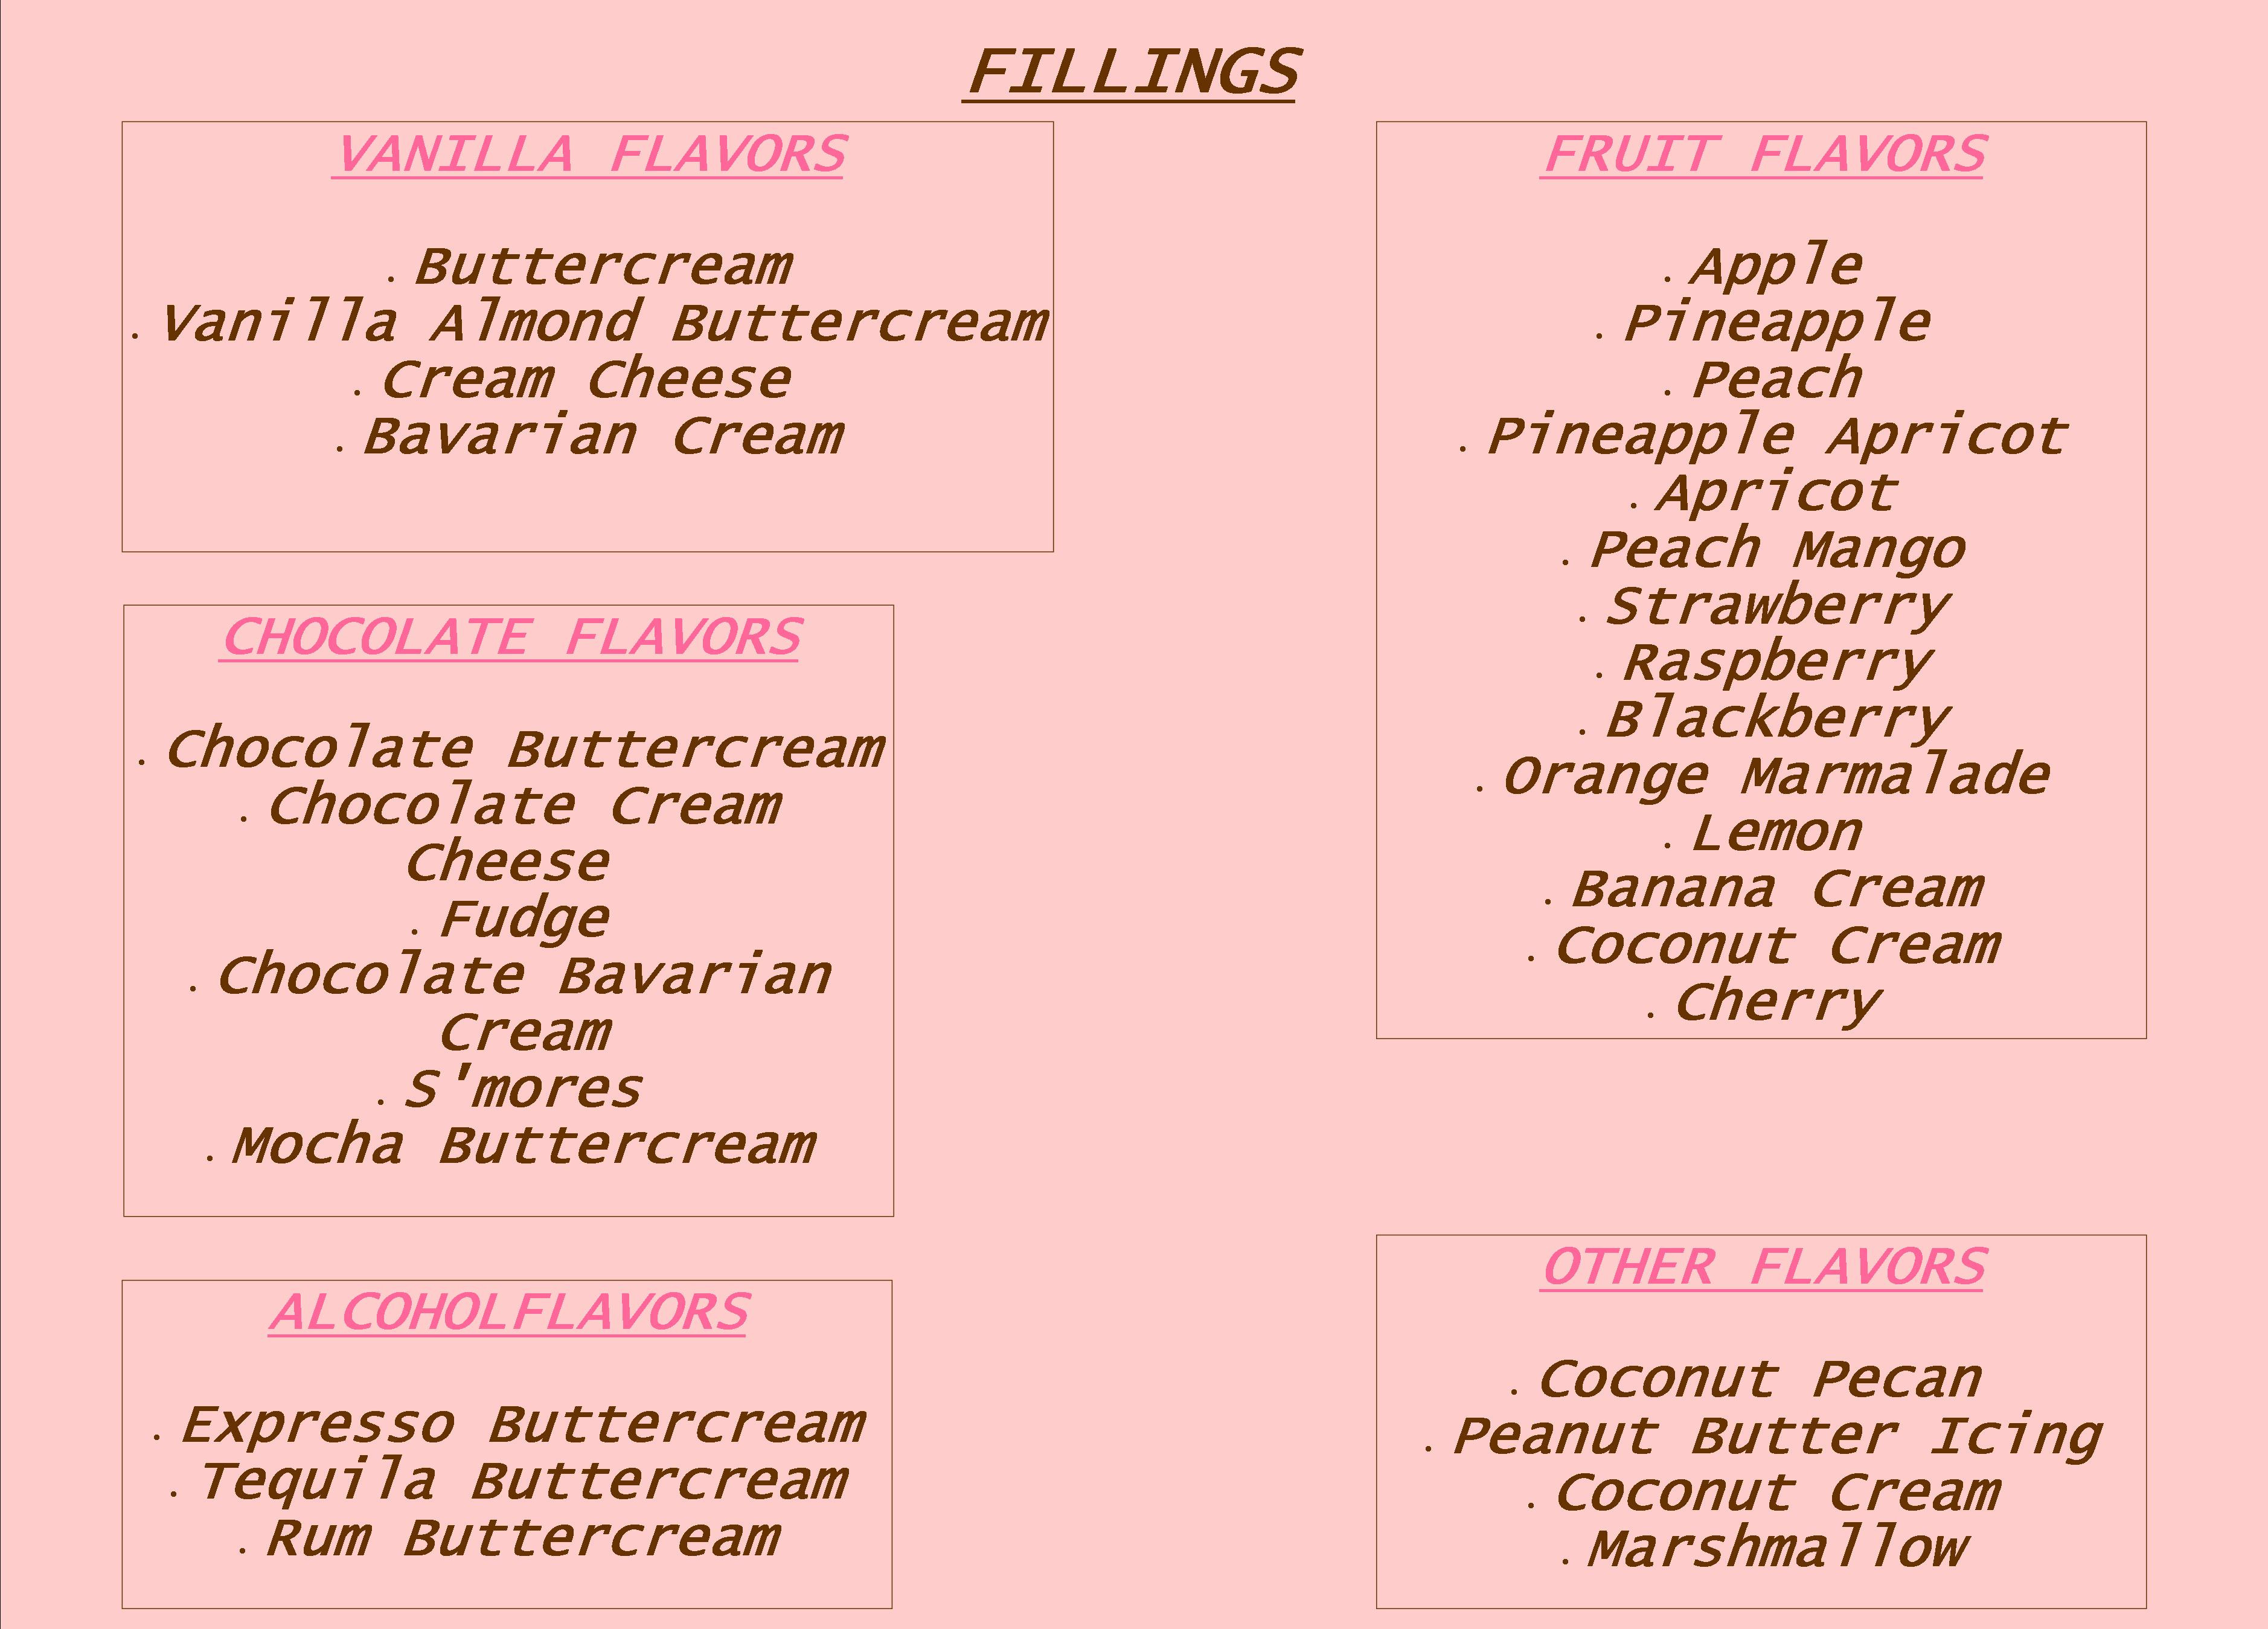 Wedding Cakes Flavours And Fillings
 wedding cake flavors and fillings